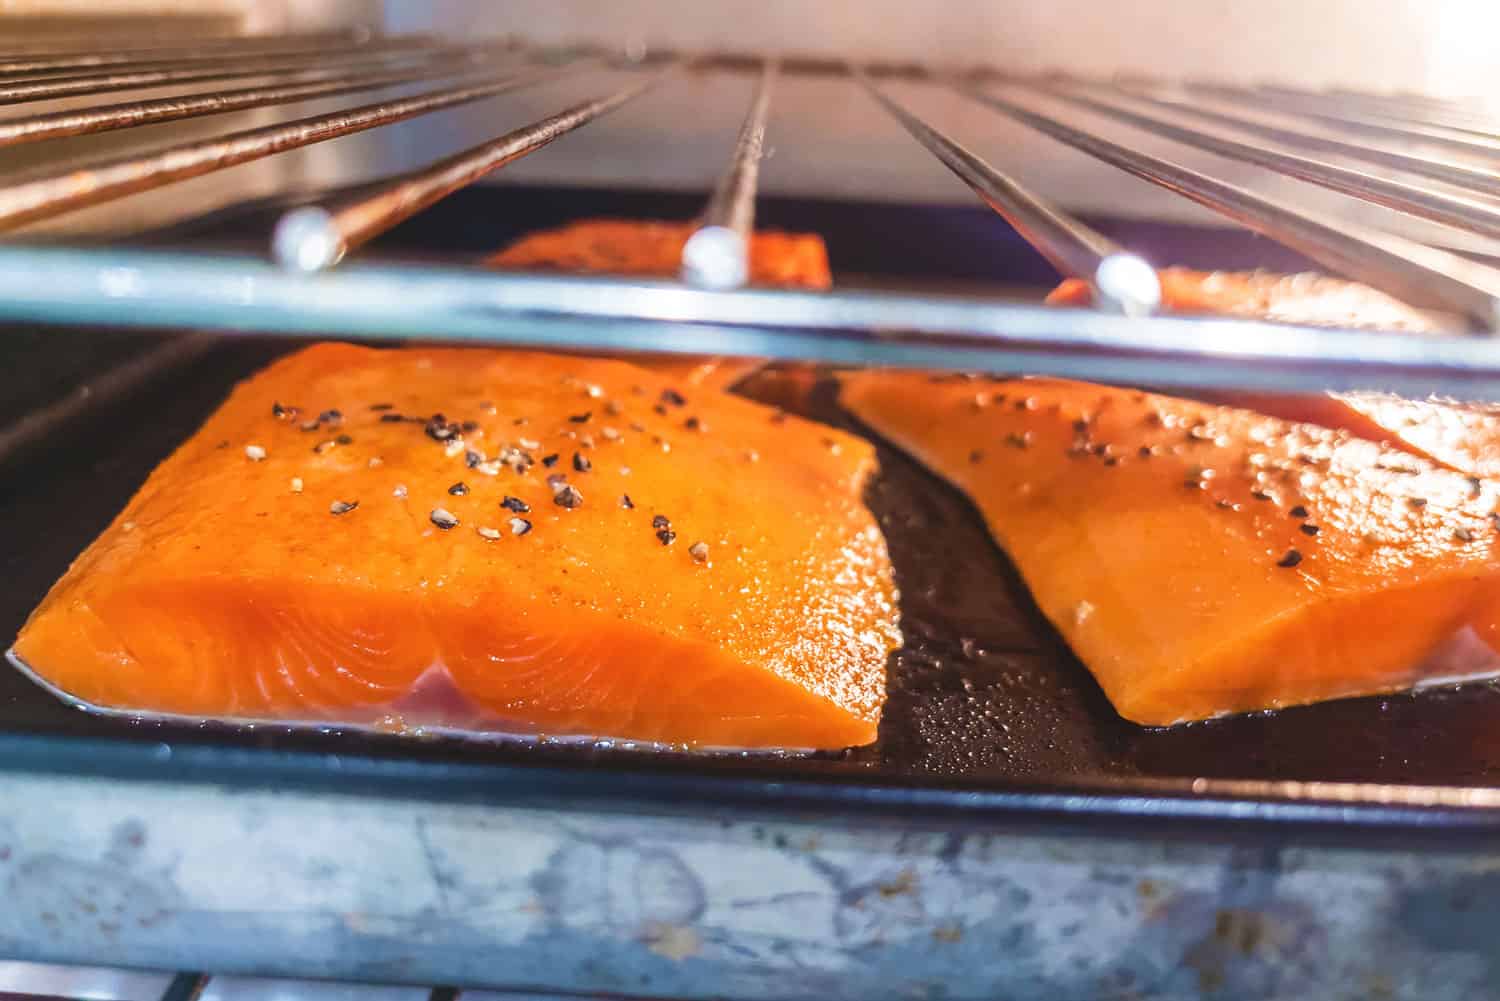 At What Temperature Should You Bake Fish Fillets? For How Long? - Kitchen Seer